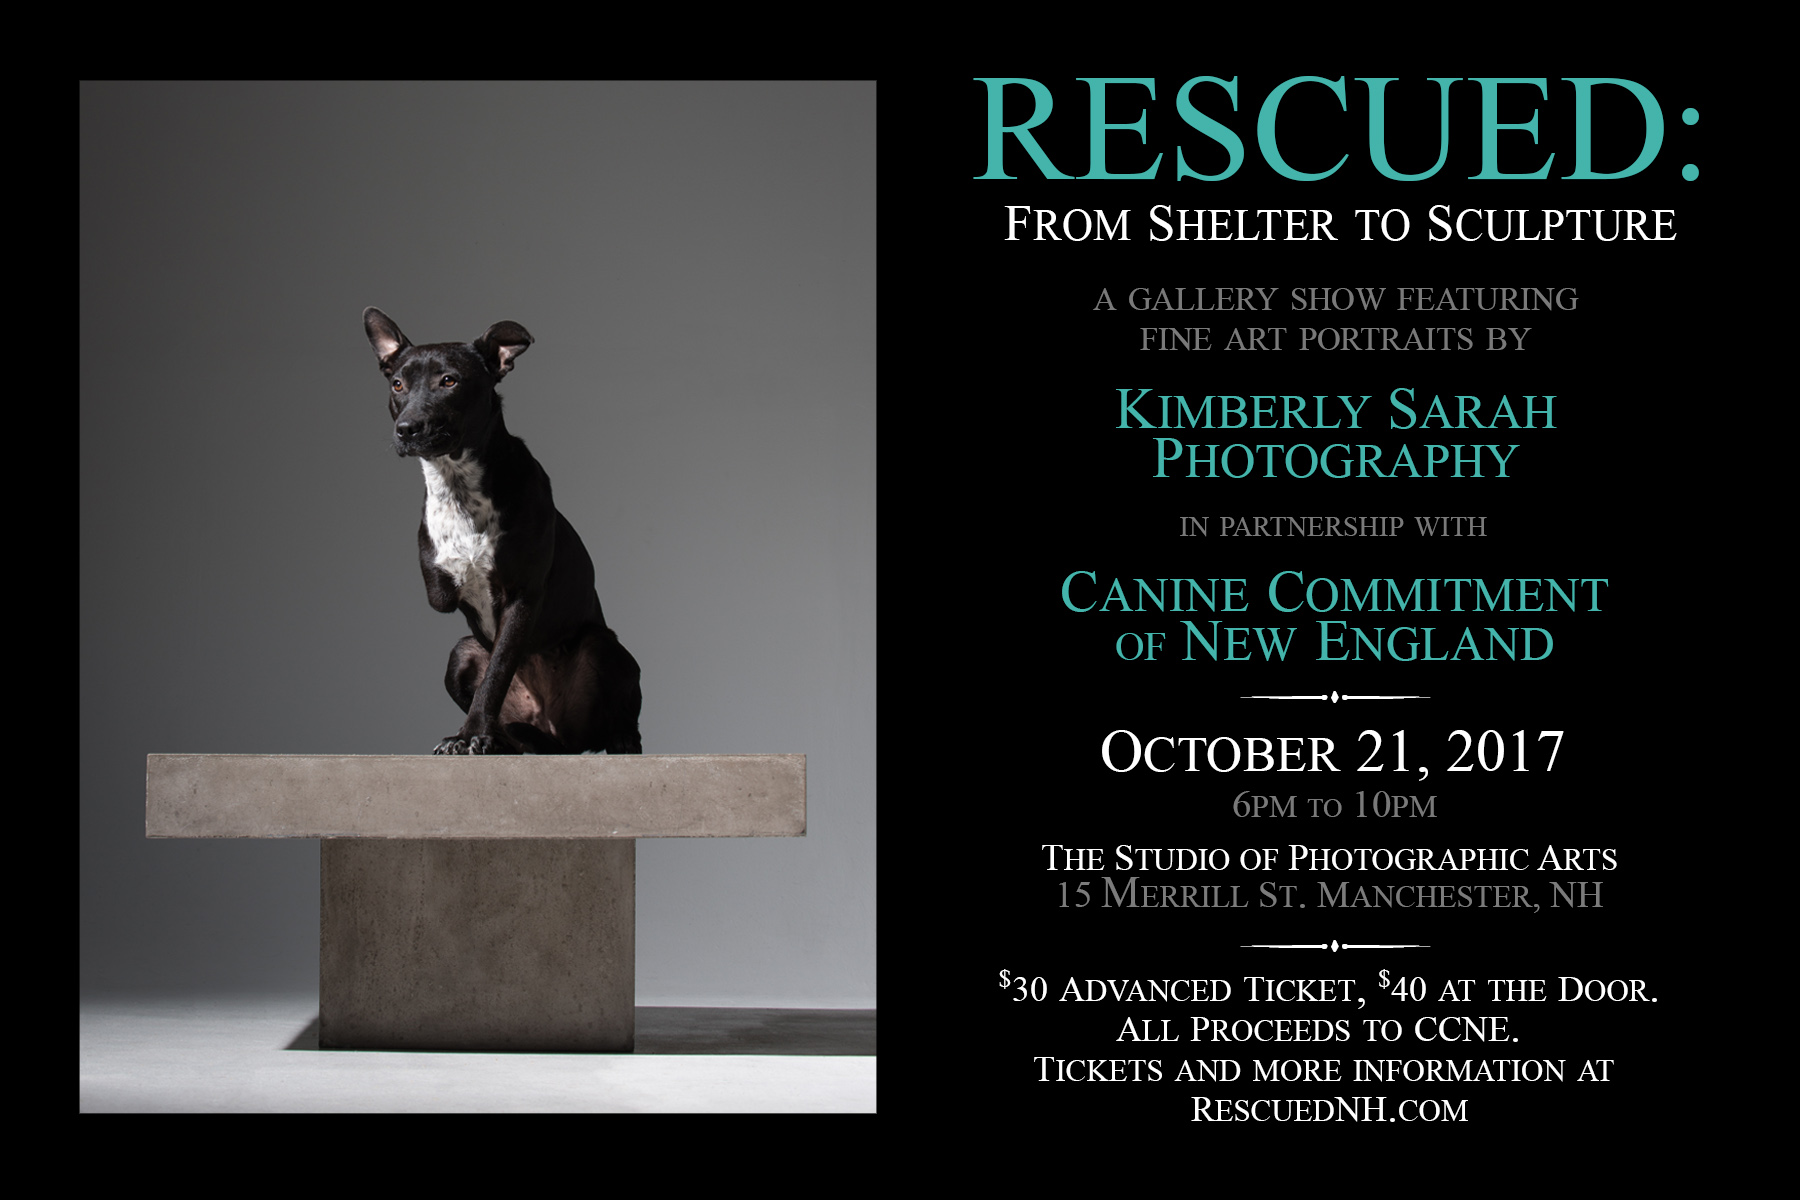 Rescued: From Shelter to Sculpture